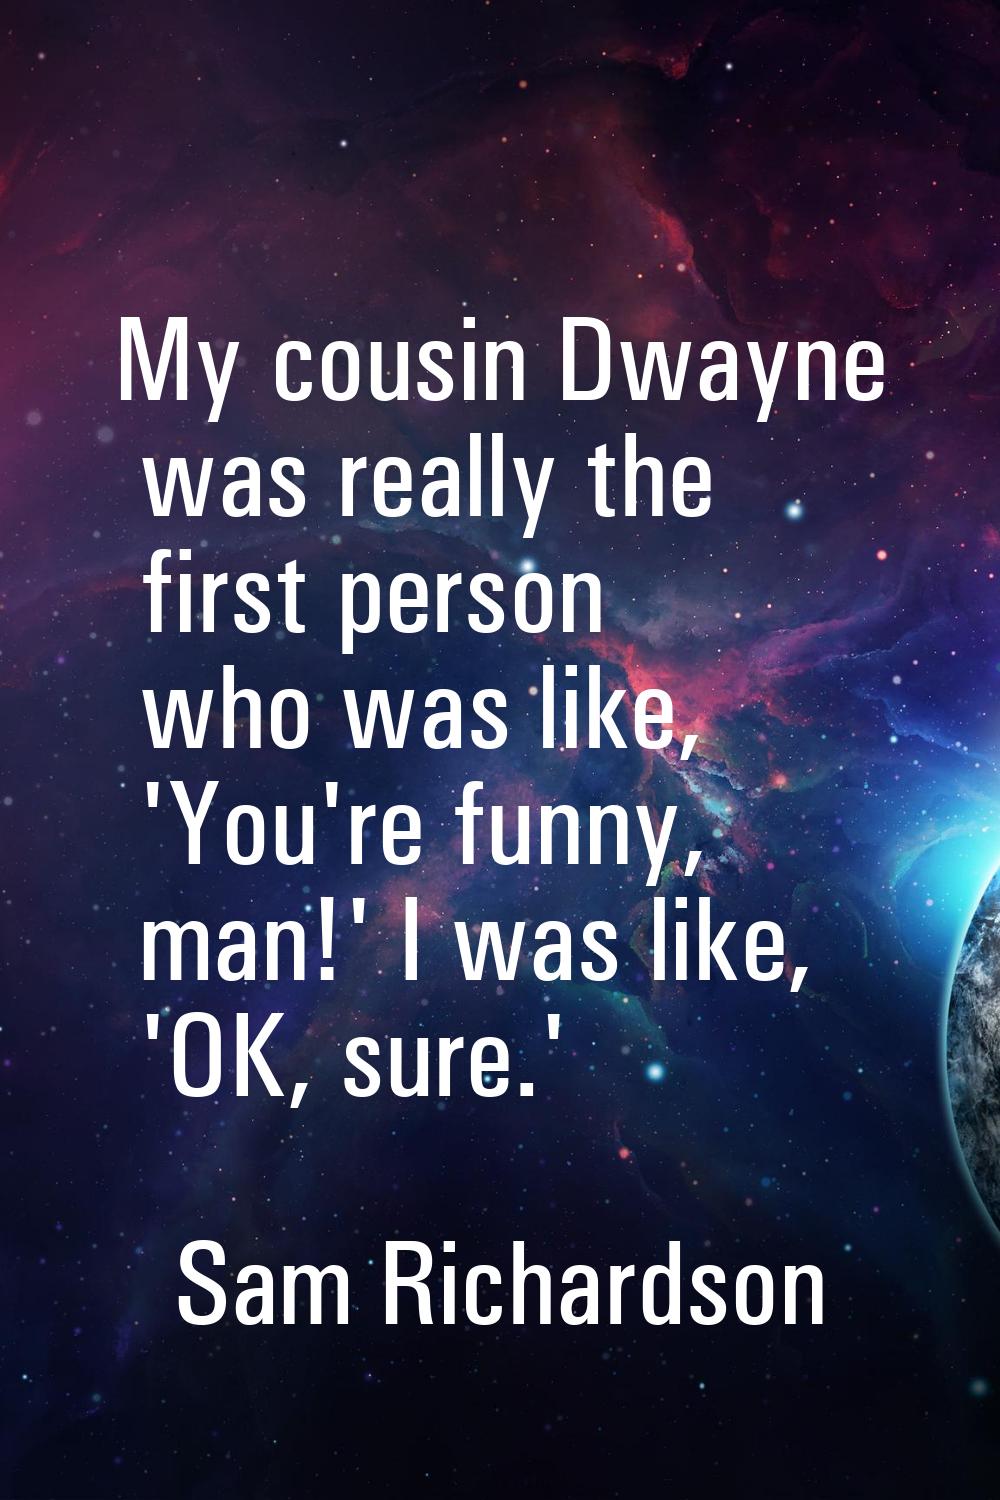 My cousin Dwayne was really the first person who was like, 'You're funny, man!' I was like, 'OK, su